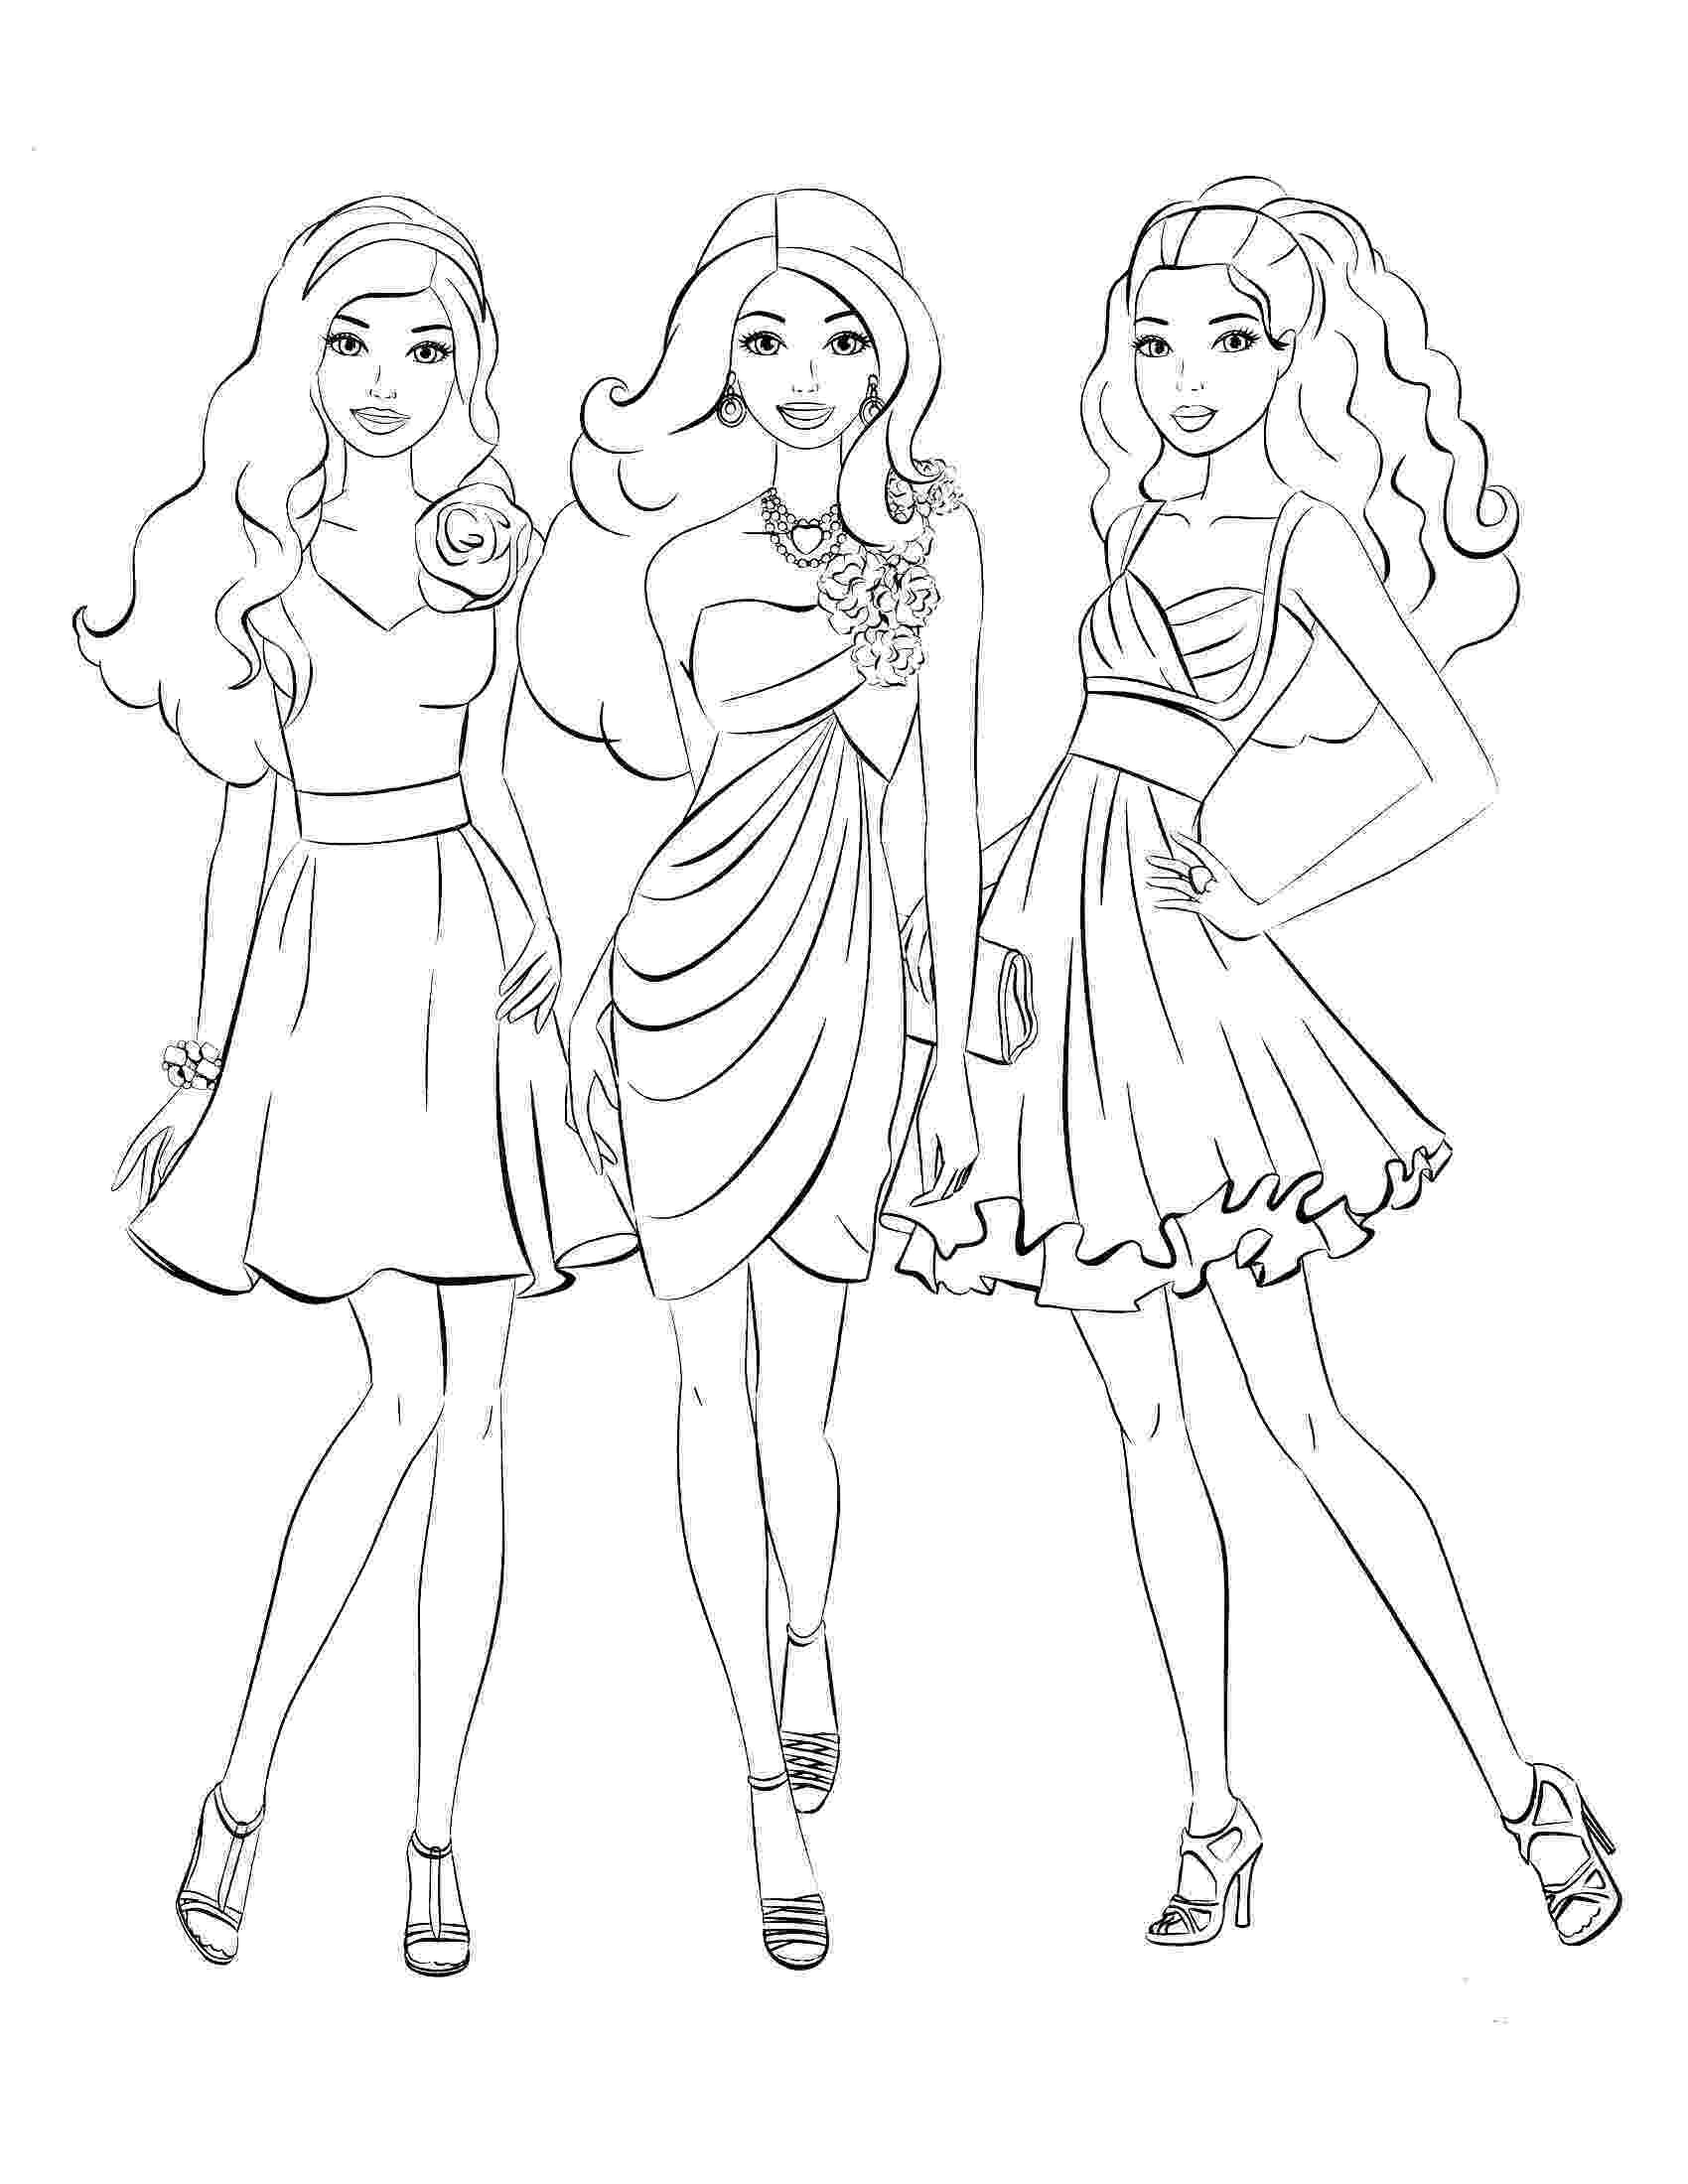 barbie coloring book free download barbie coloring pages ken and barbie black and white download barbie coloring book free 